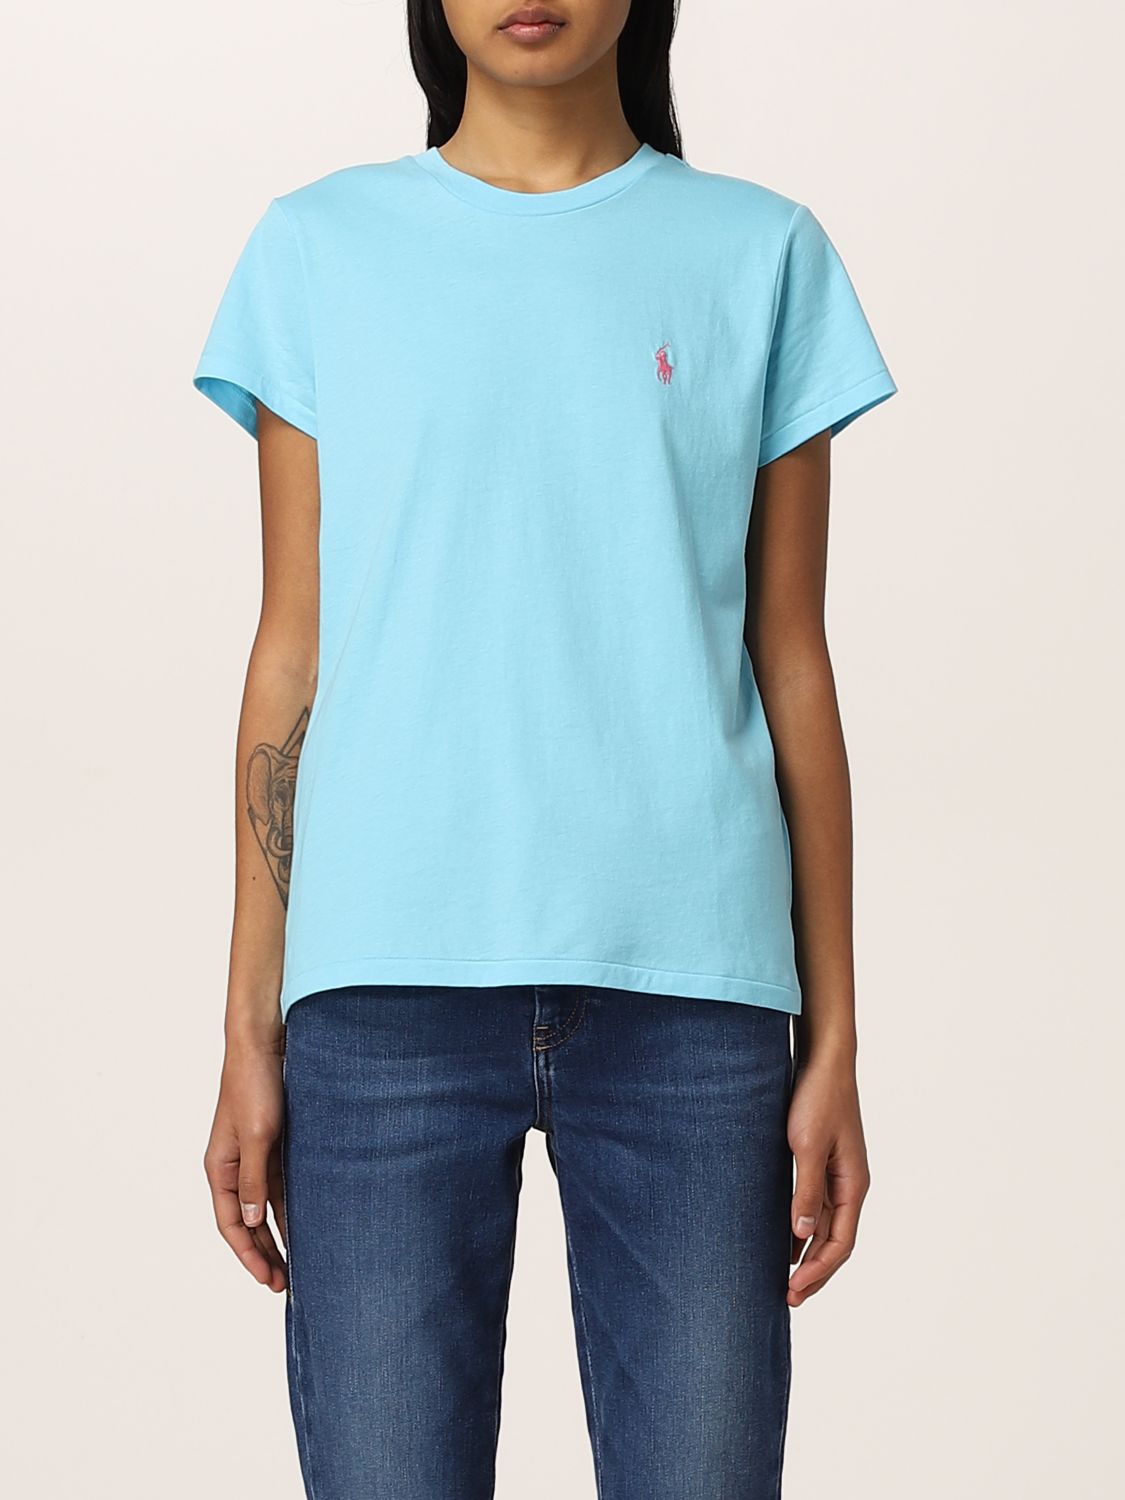 POLO RALPH LAUREN: cotton t-shirt with logo - Turquoise | Polo Ralph ...